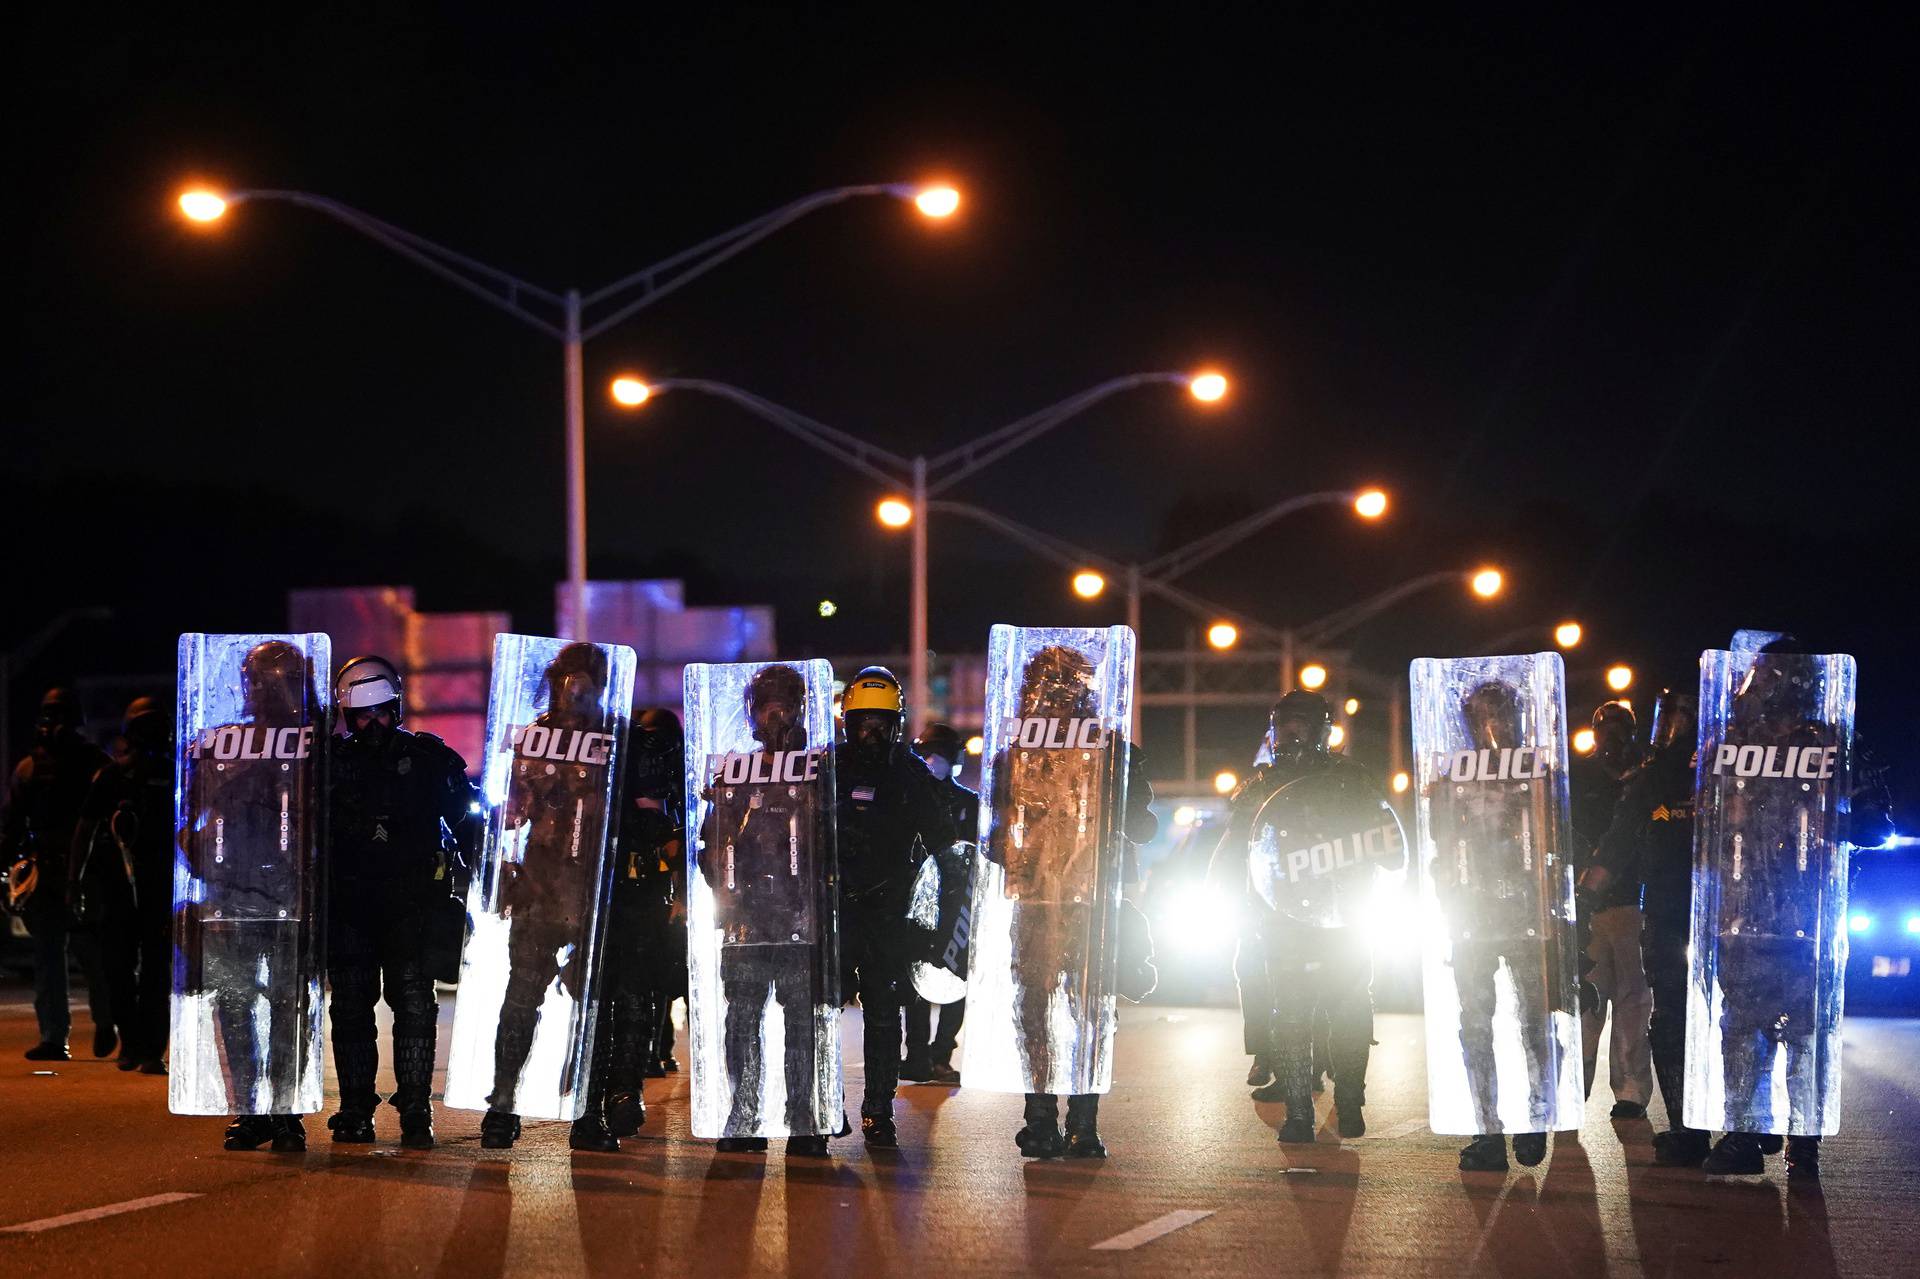 Police with riot shields advance to detain protesters for blocking traffic on a freeway during a rally against racial inequality and the police shooting death of Rayshard Brooks, in Atlanta